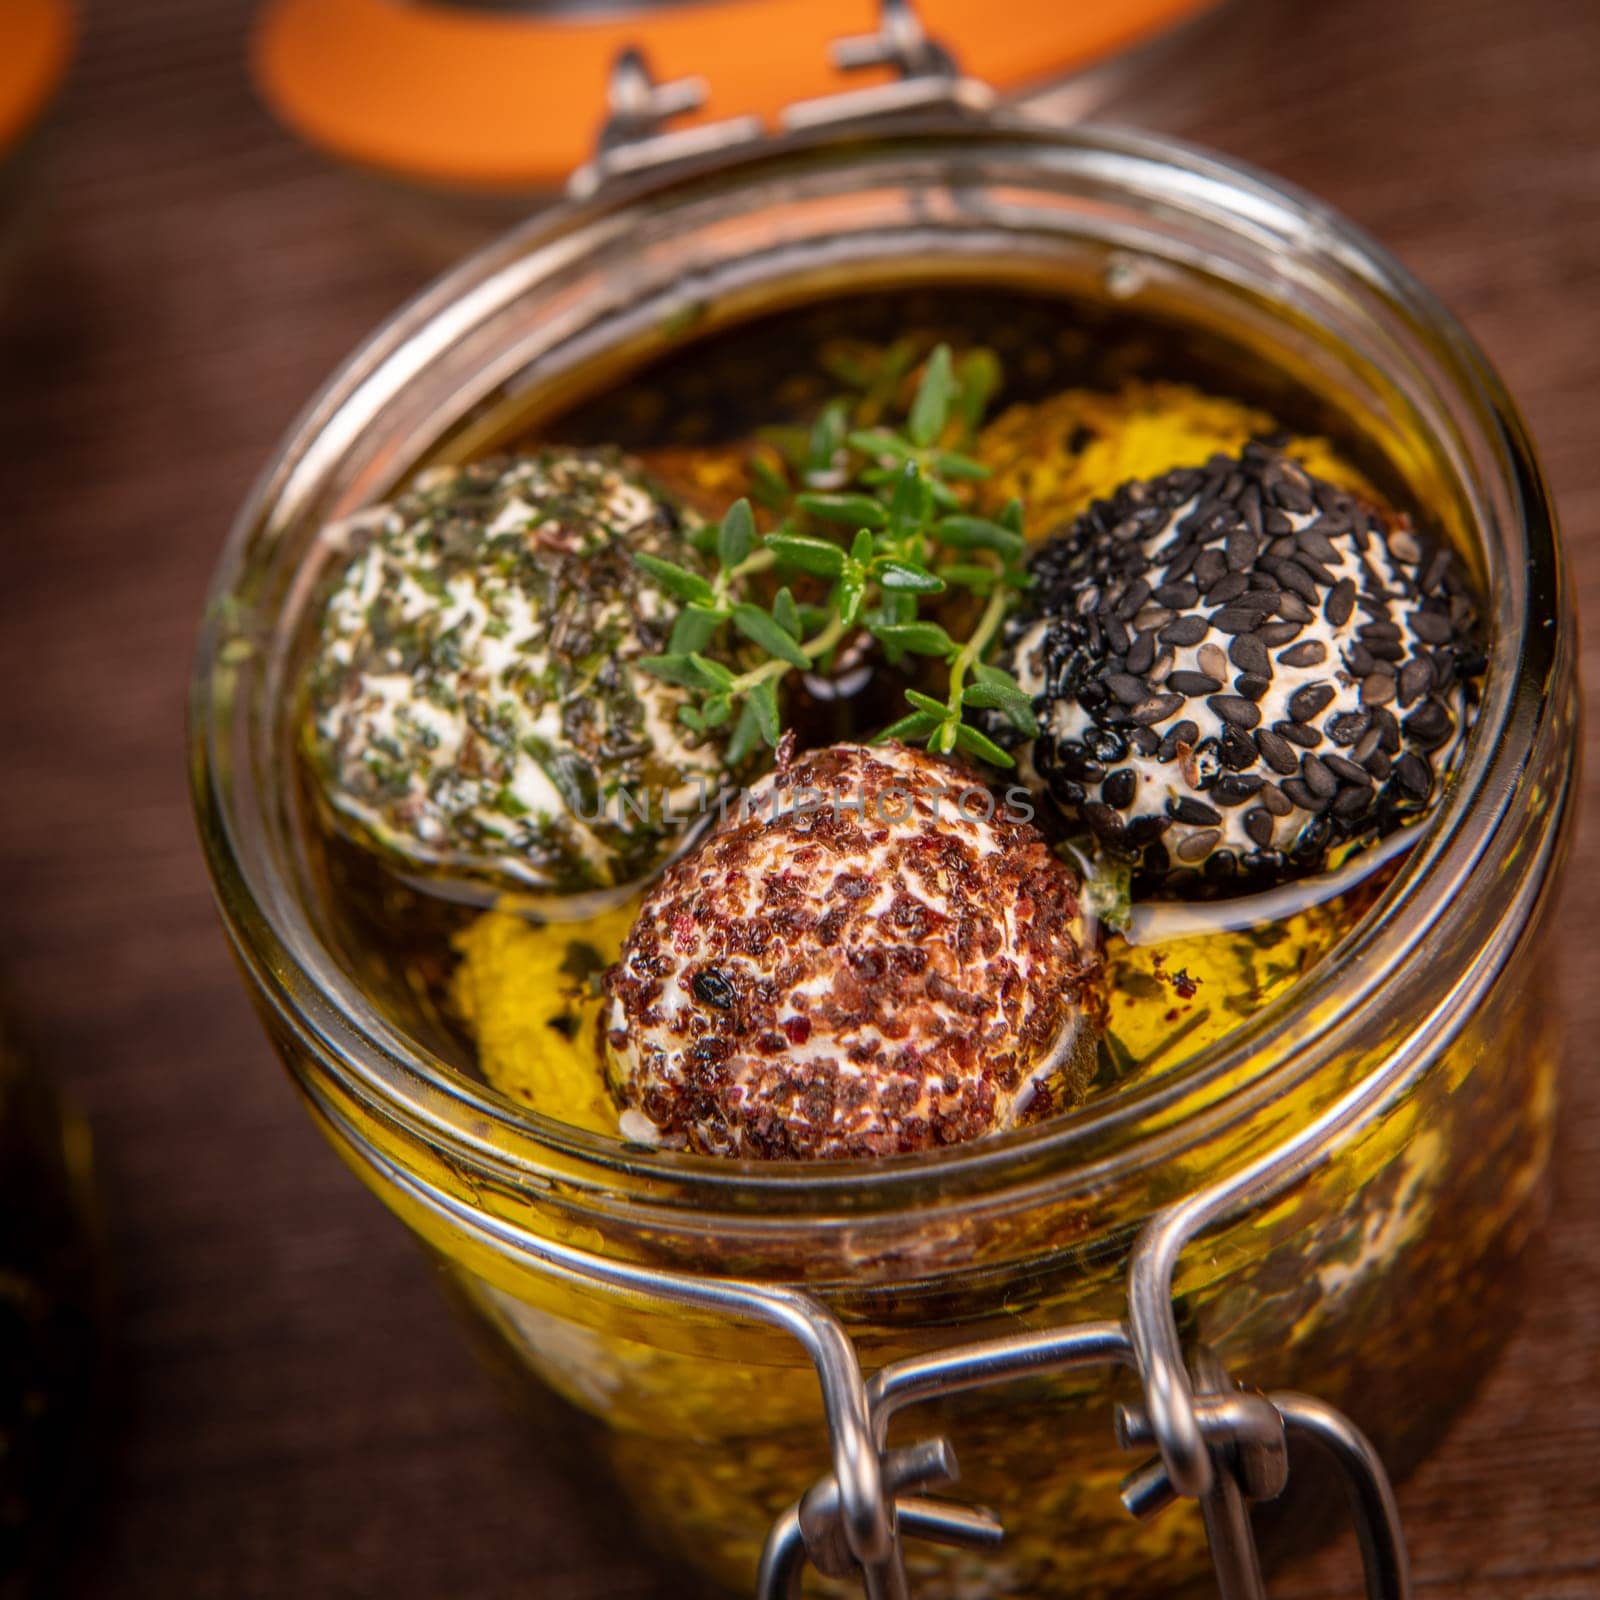 RECIPE FOR LABNEH CHEESE BOLLS WITH DRY MINT, BLACK AND WHITE SESAME, SUMAC AND ZAATAR IN A JAR WITH OLIVE OIL. High quality photo